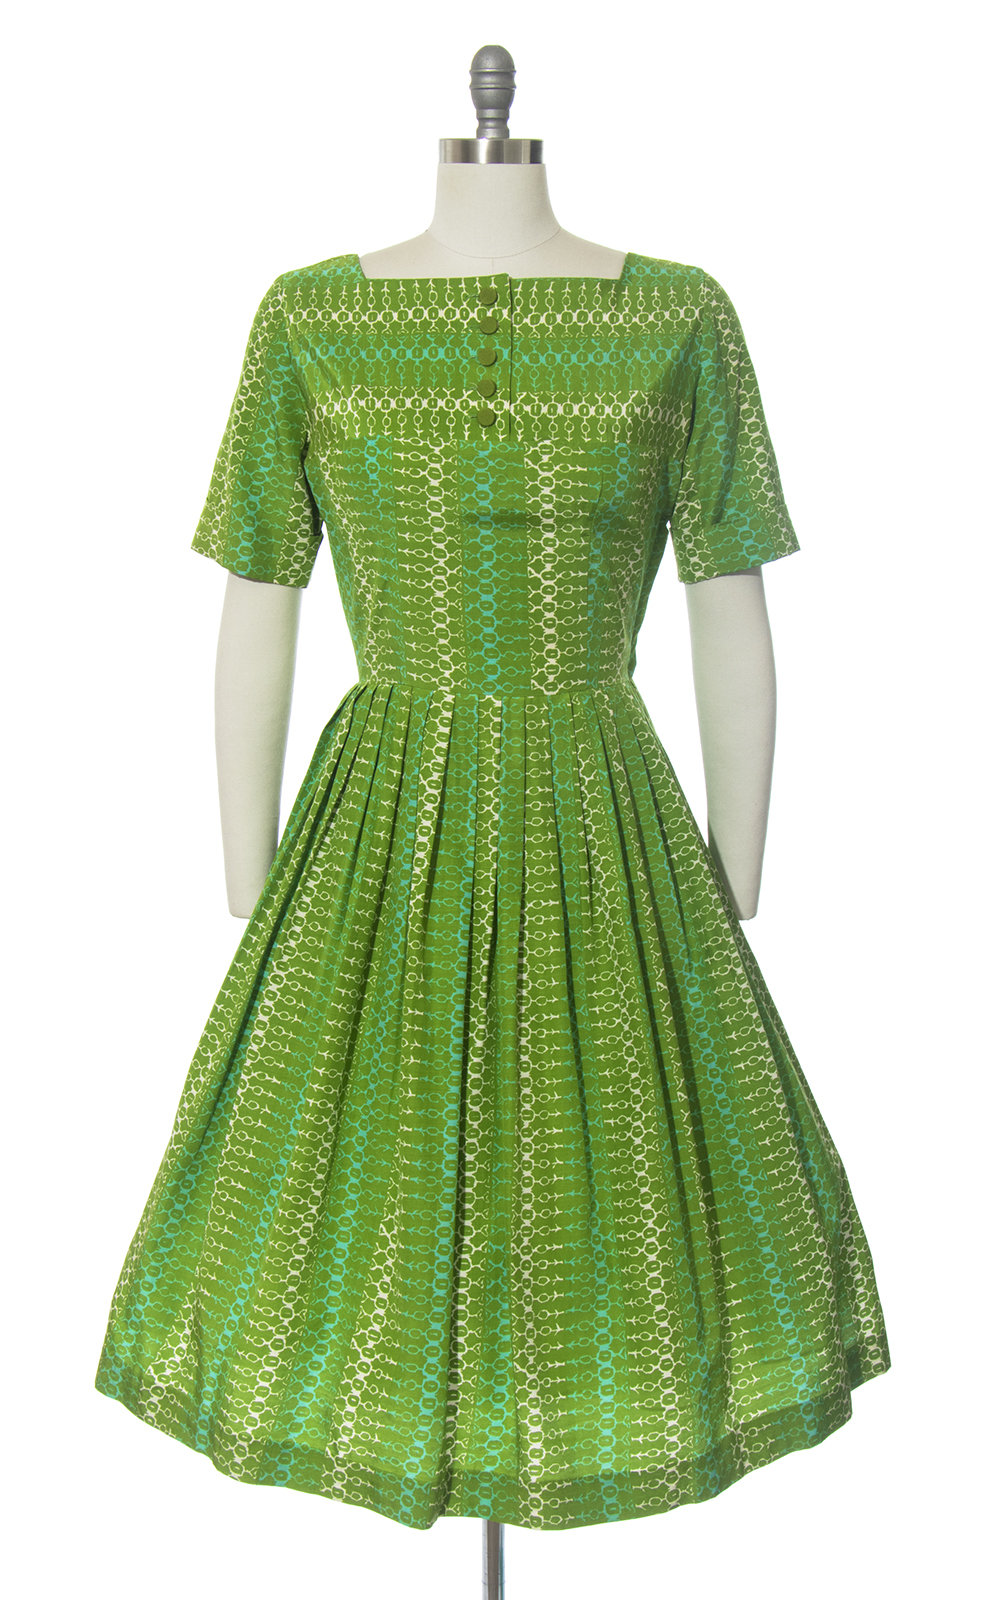 Vintage 1950s | 50s Striped Printed Green Turquoise Rayon Cotton Full Skirt Day Dress (medium)